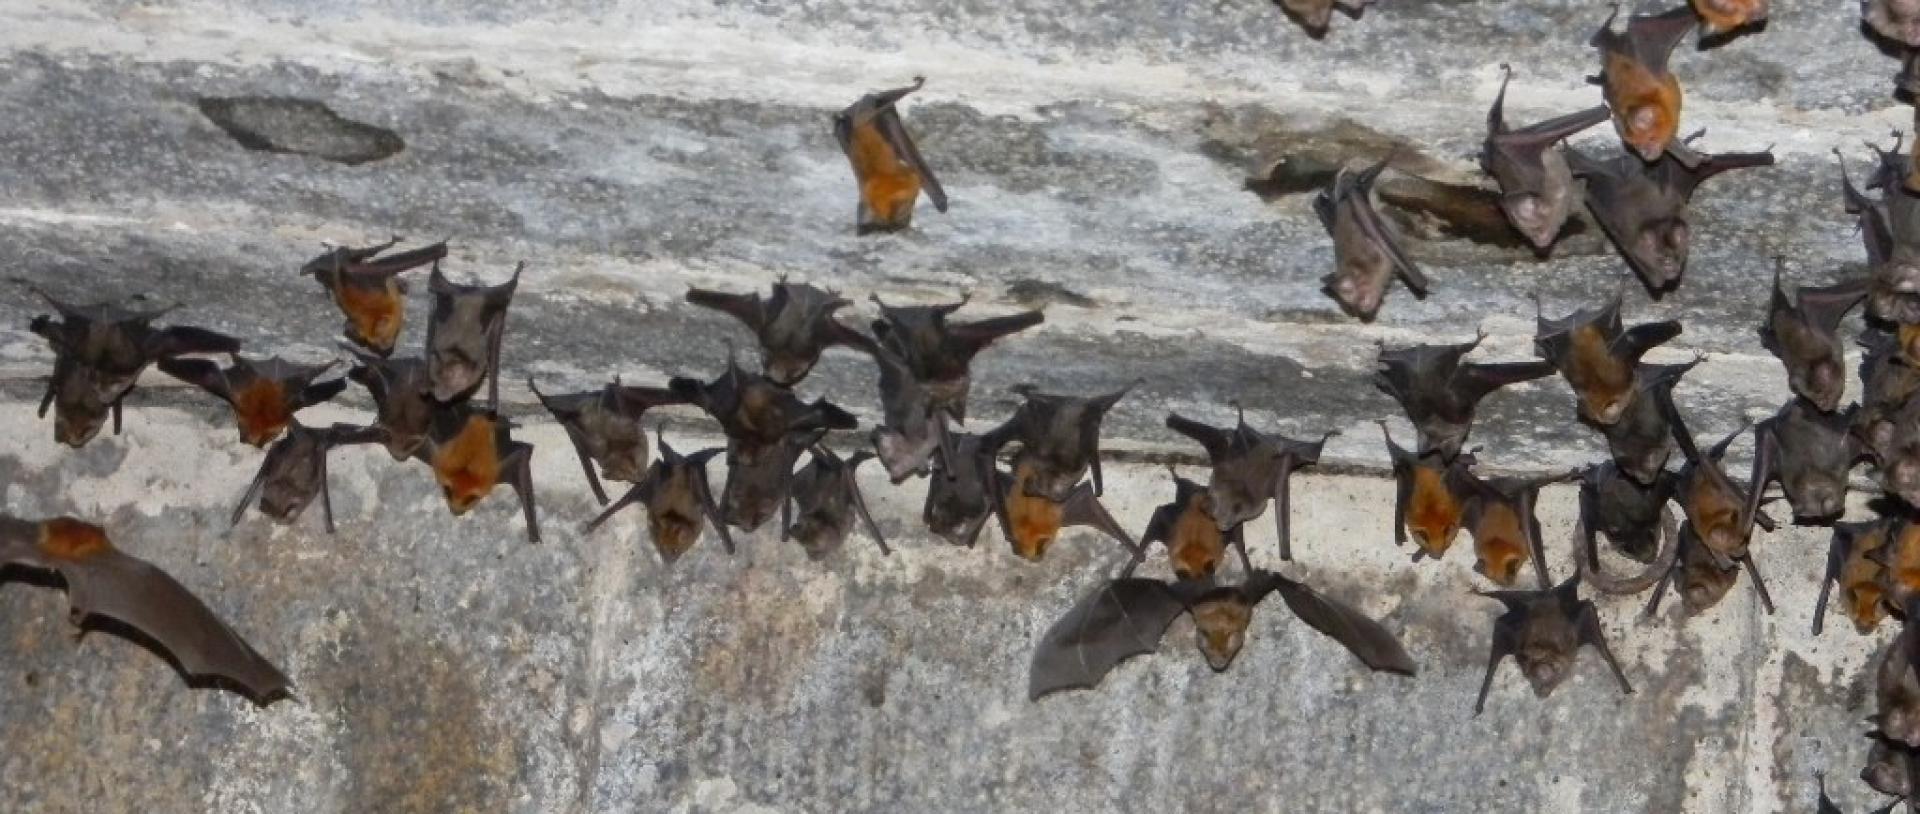 Bats in a cave